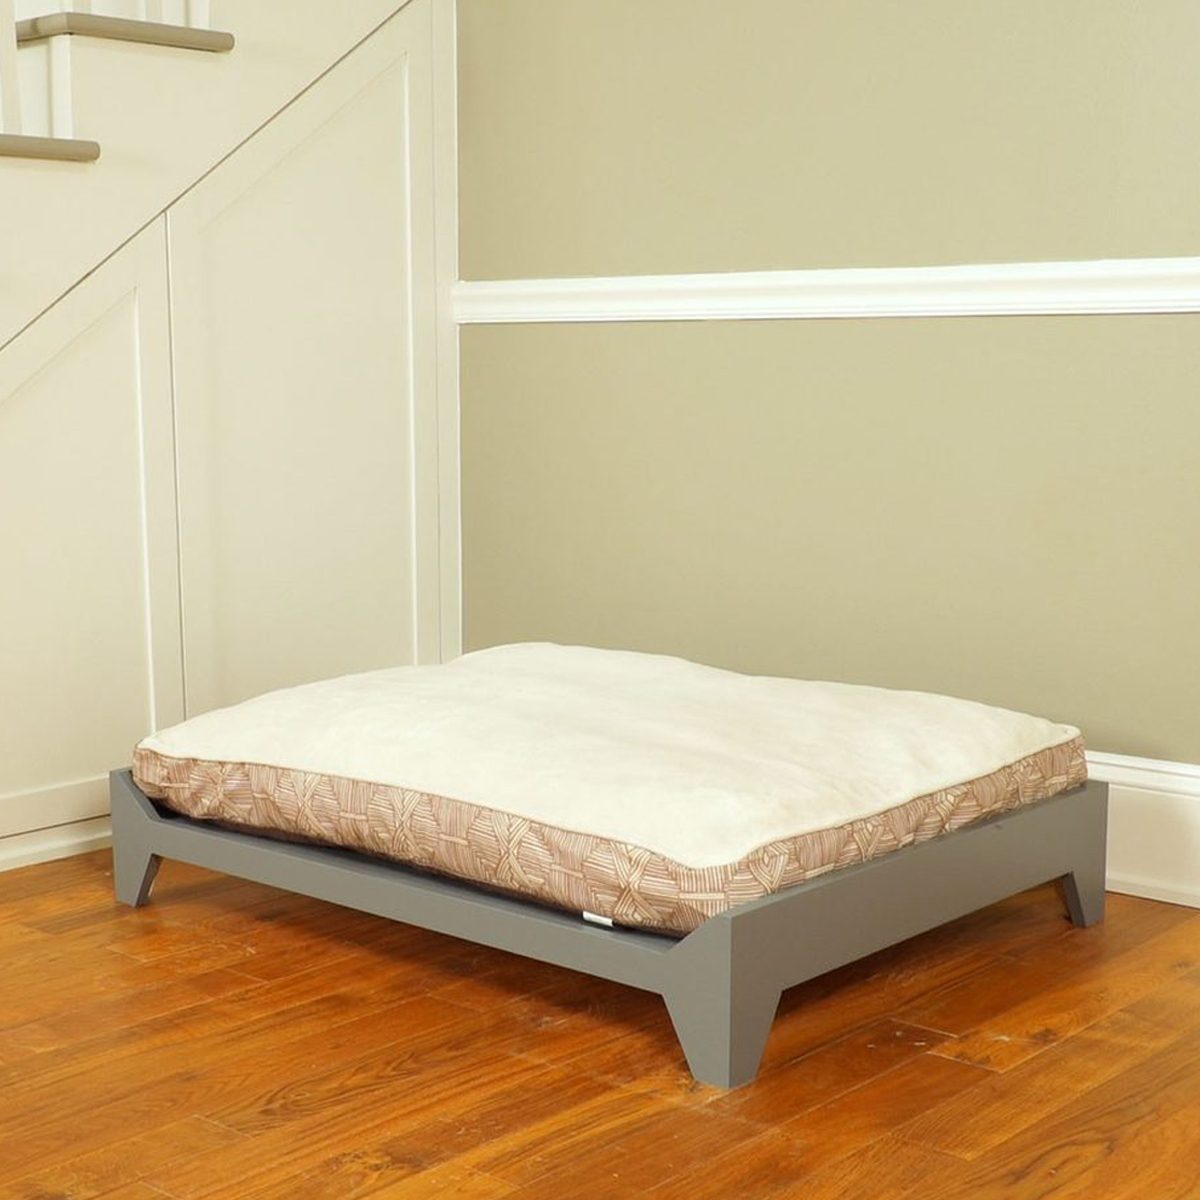 Fhm How To Build A Raised Dog Bed